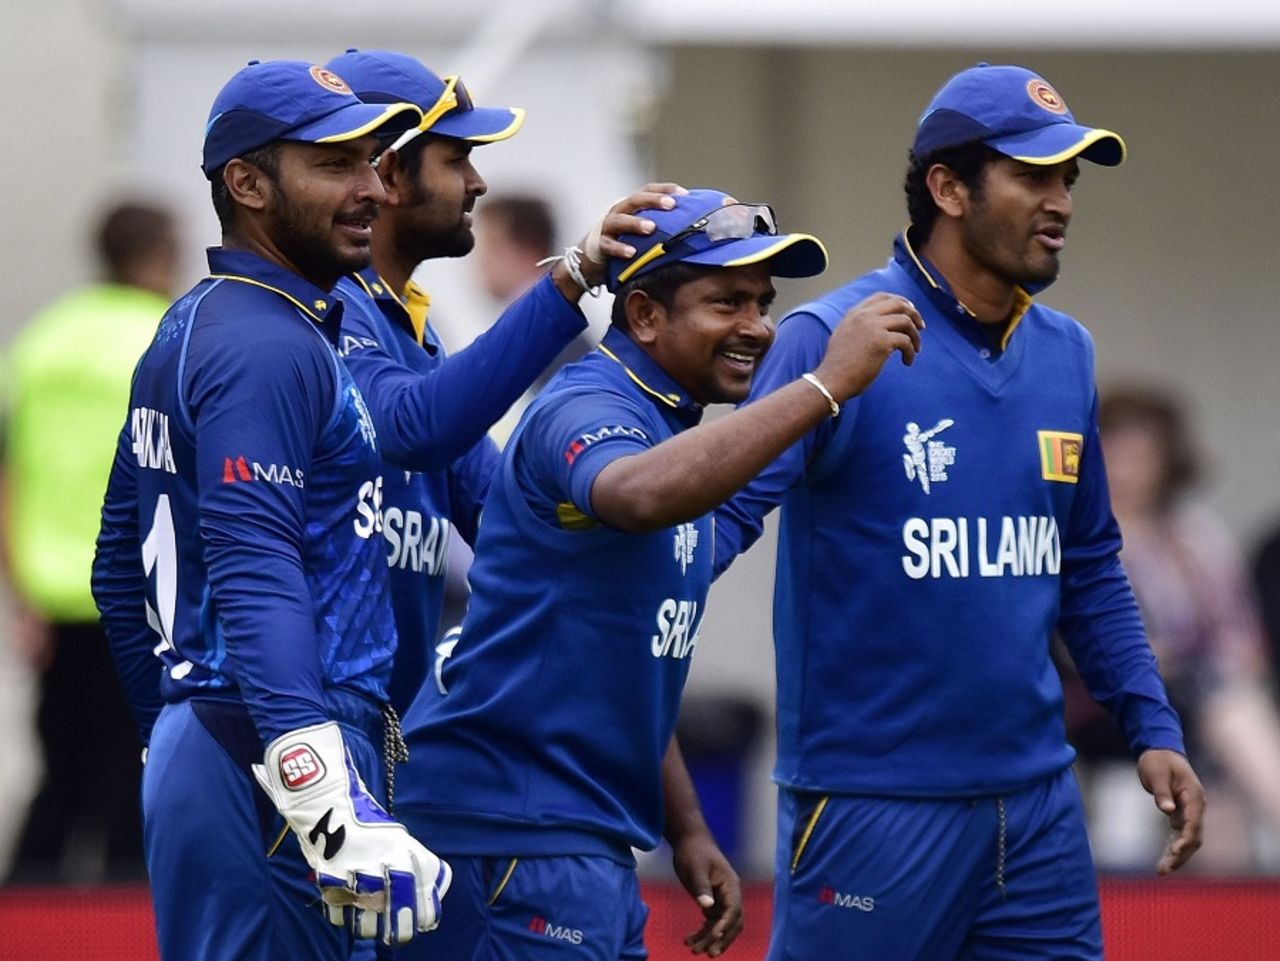 Rangana Herath is thrilled after taking the catch to dismiss Javed Ahmadi, Afghanistan v Sri Lanka, World Cup 2015, Group A, Dunedin, February 22, 2015